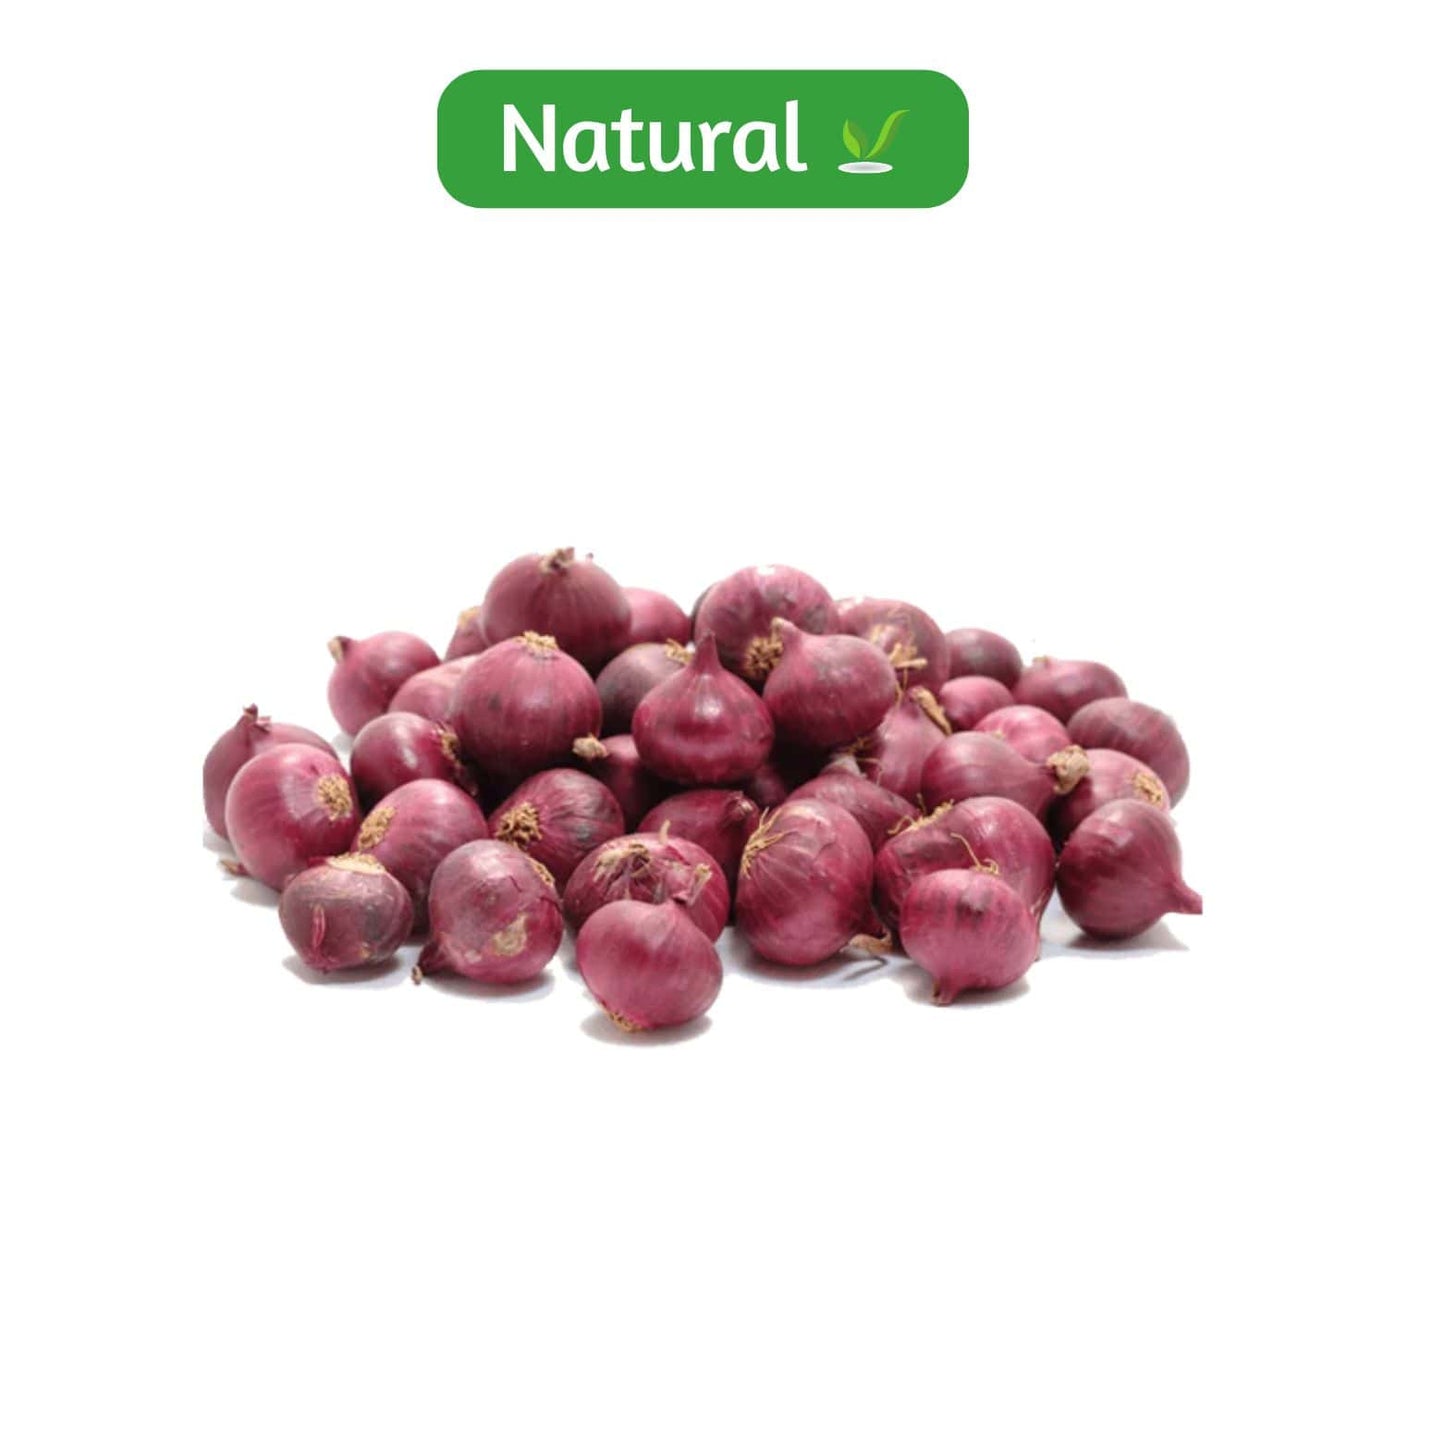 organic Sambar Onion - Online store for organic products in Bangalore - Eerulli | Vegetables